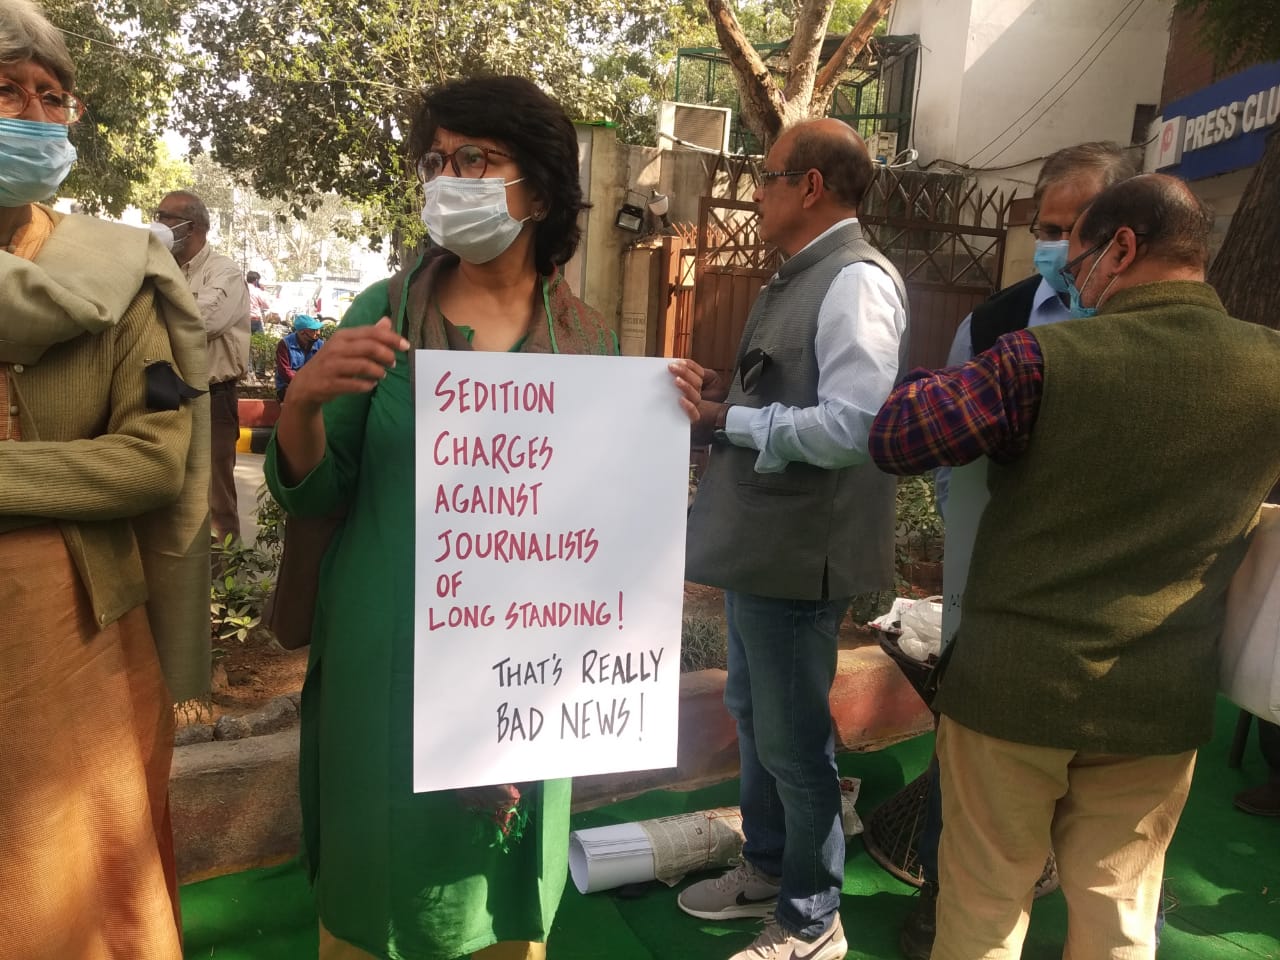 delhi: journalists stage symbolic silent sit-in against media gagging | newsclick